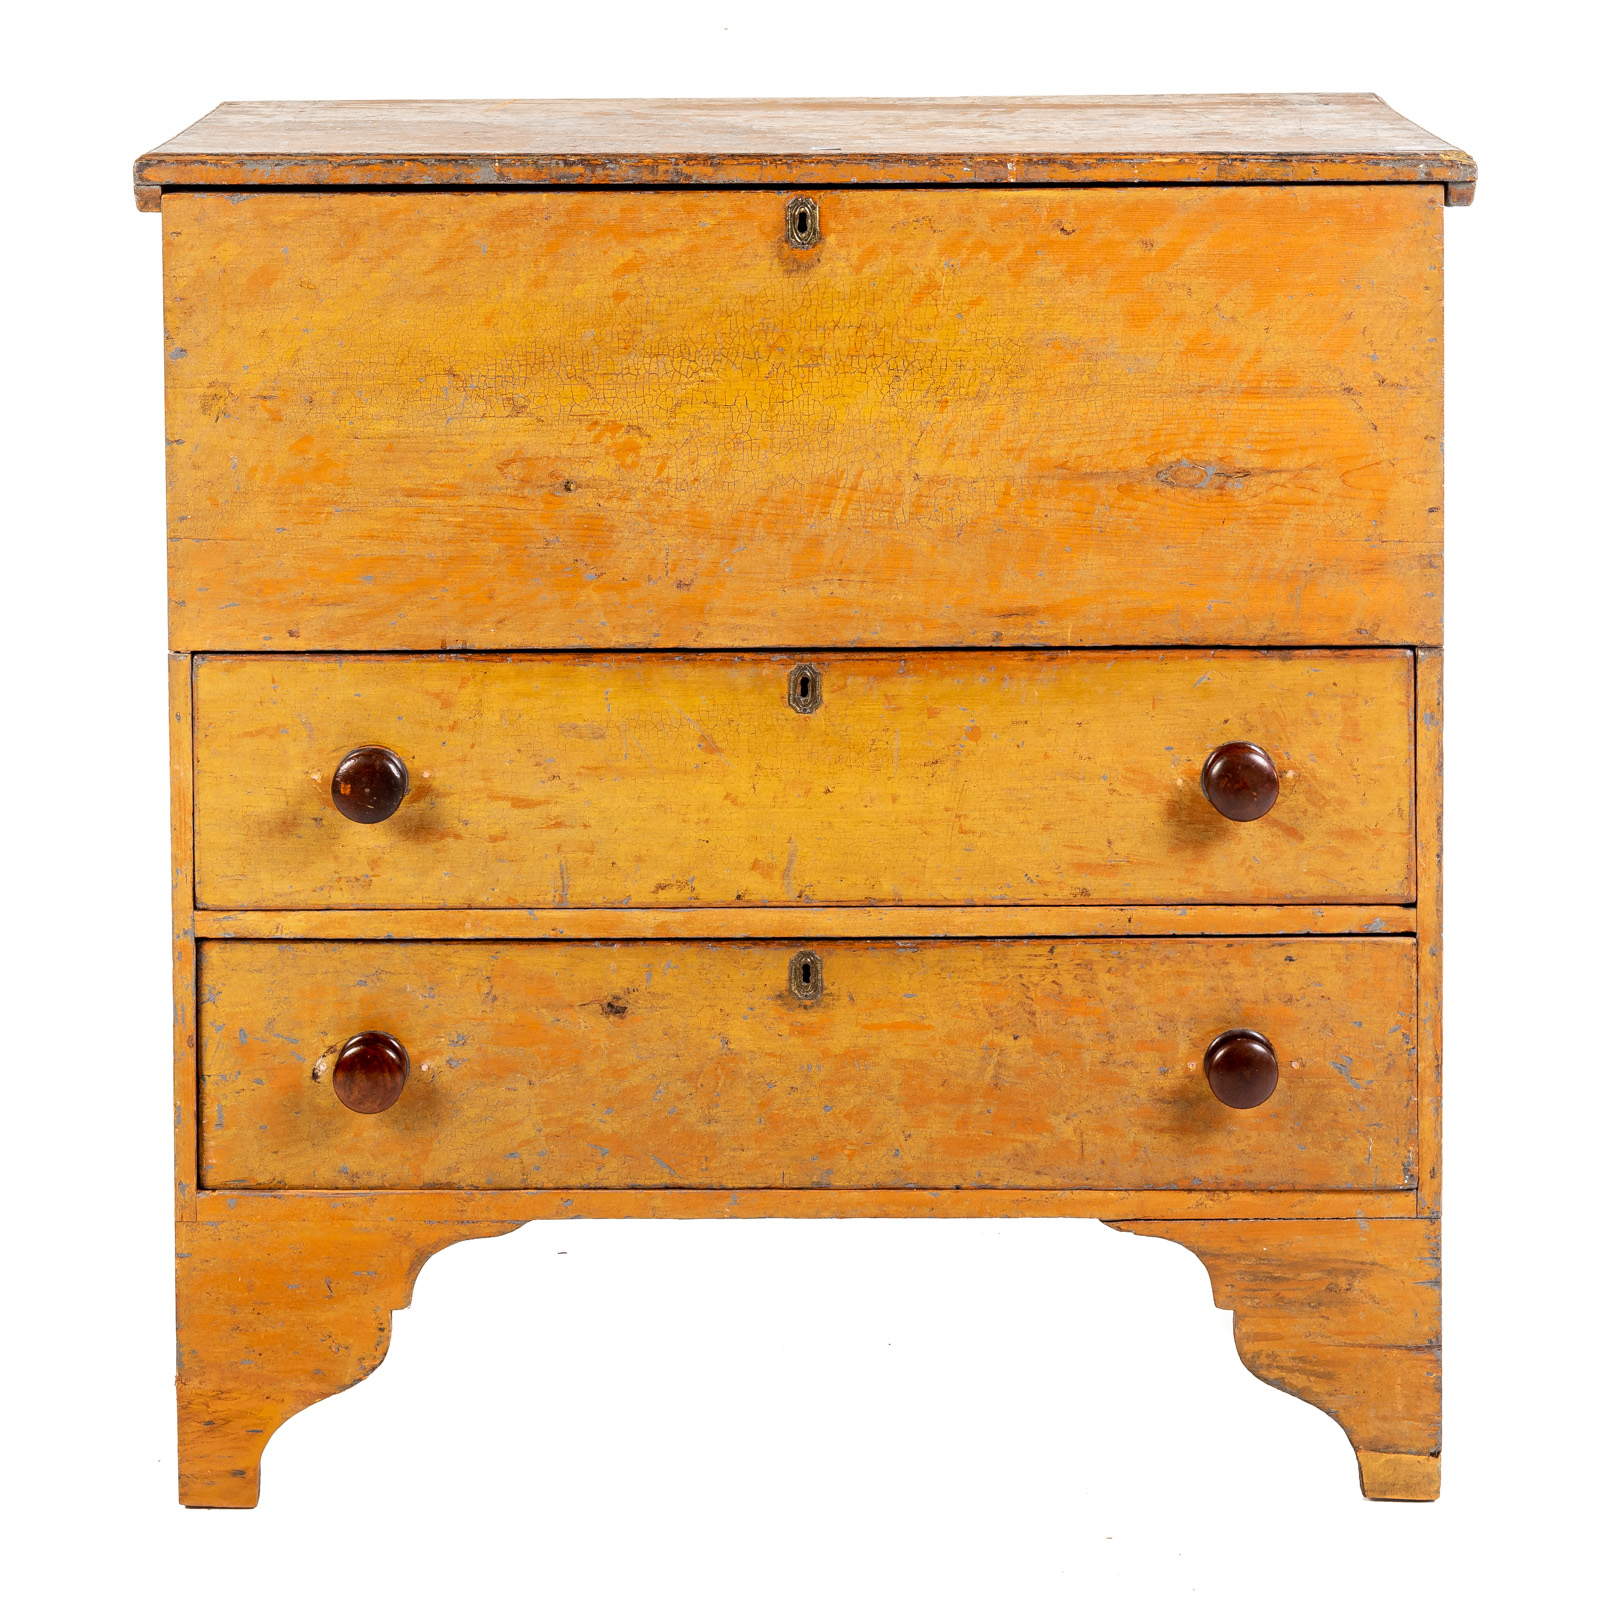 COUNTRY MUSTARD PAINTED MULE CHEST 2872d5